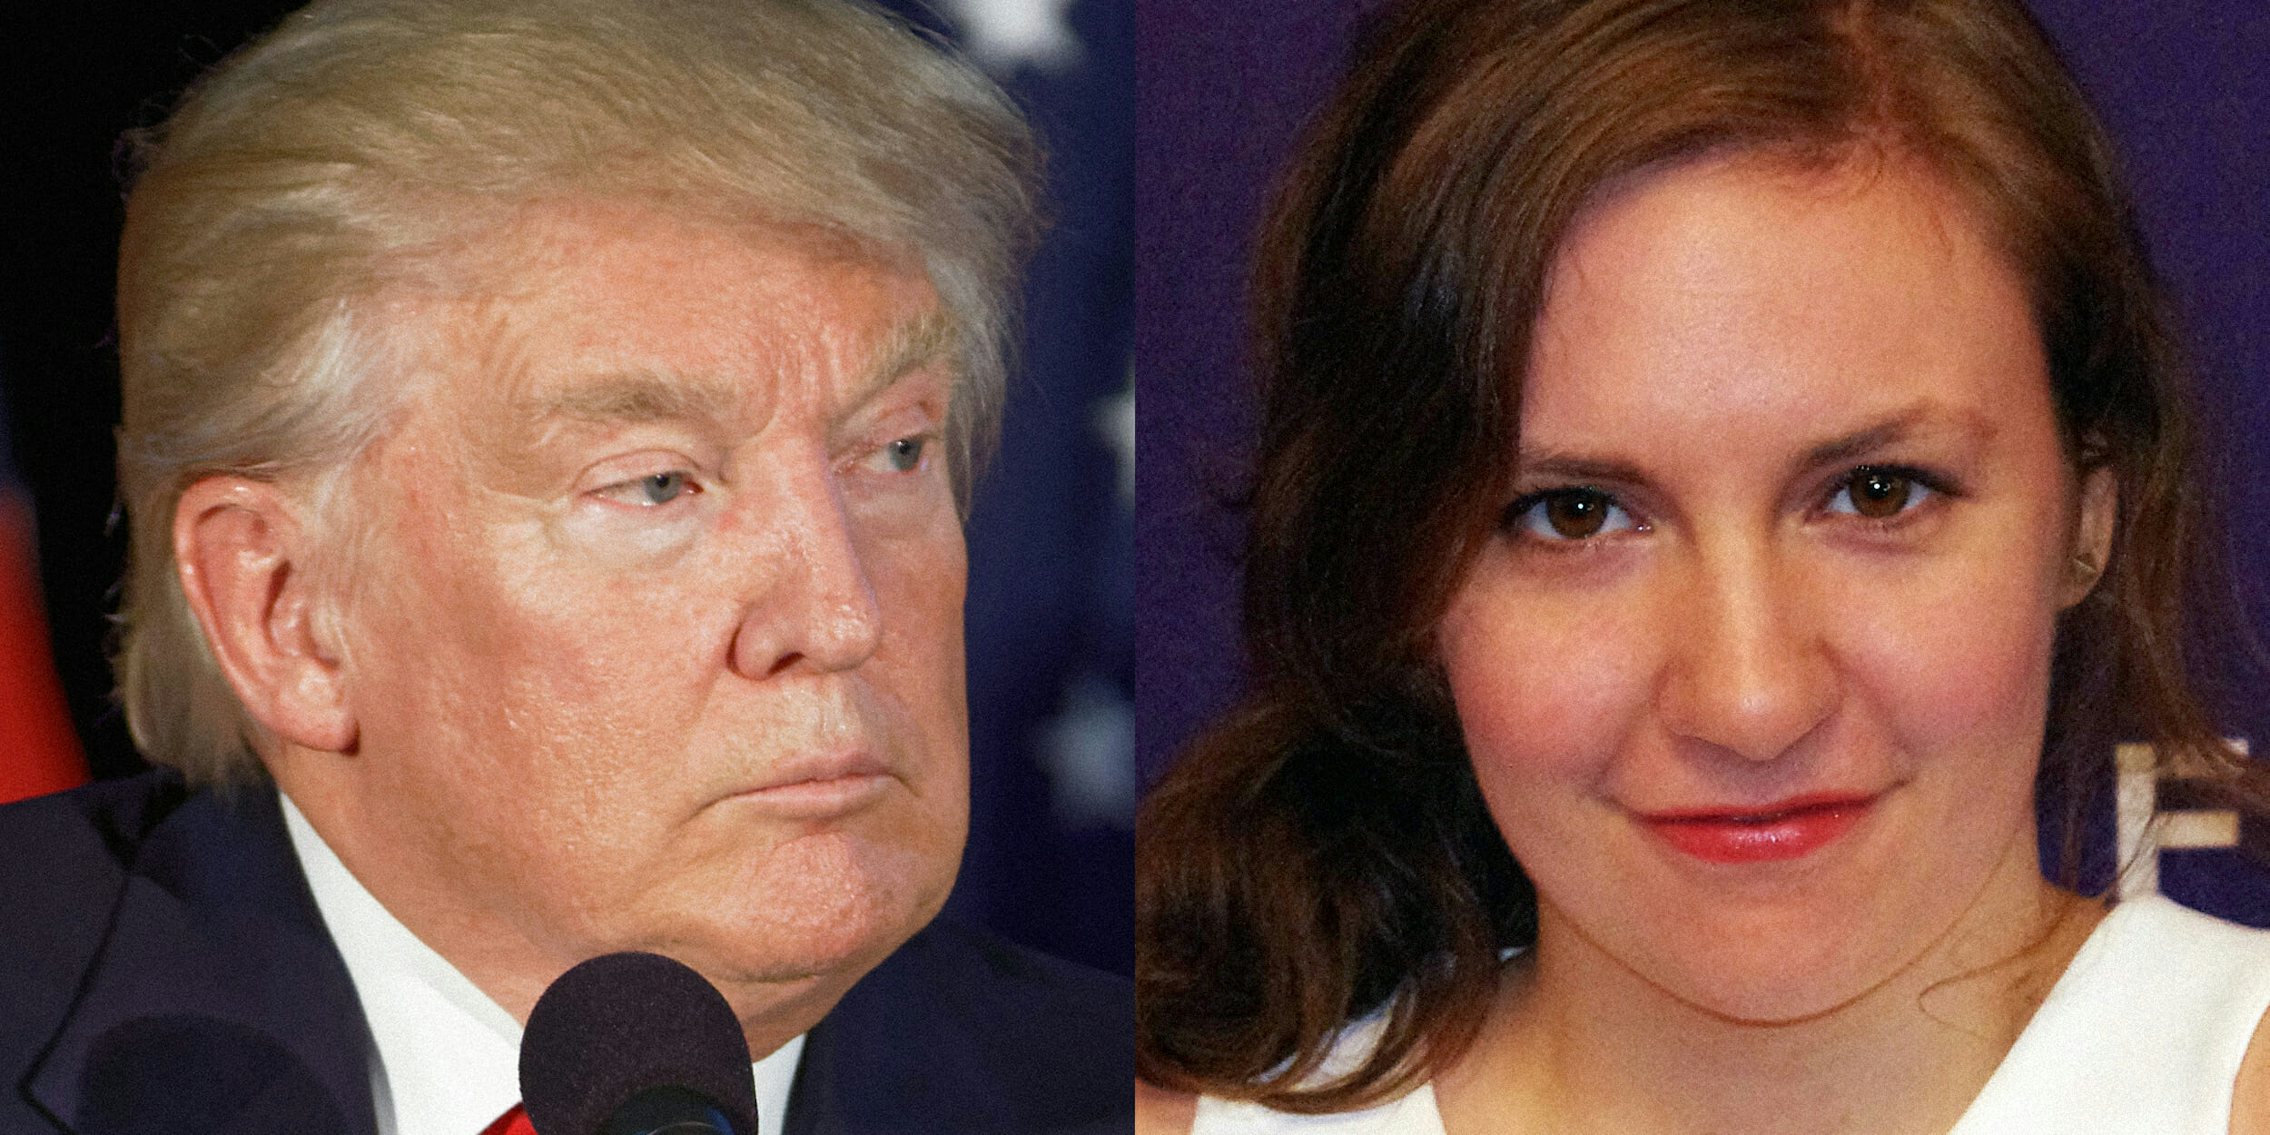 Lena Dunham compares Donald Trump to Dylann Roof